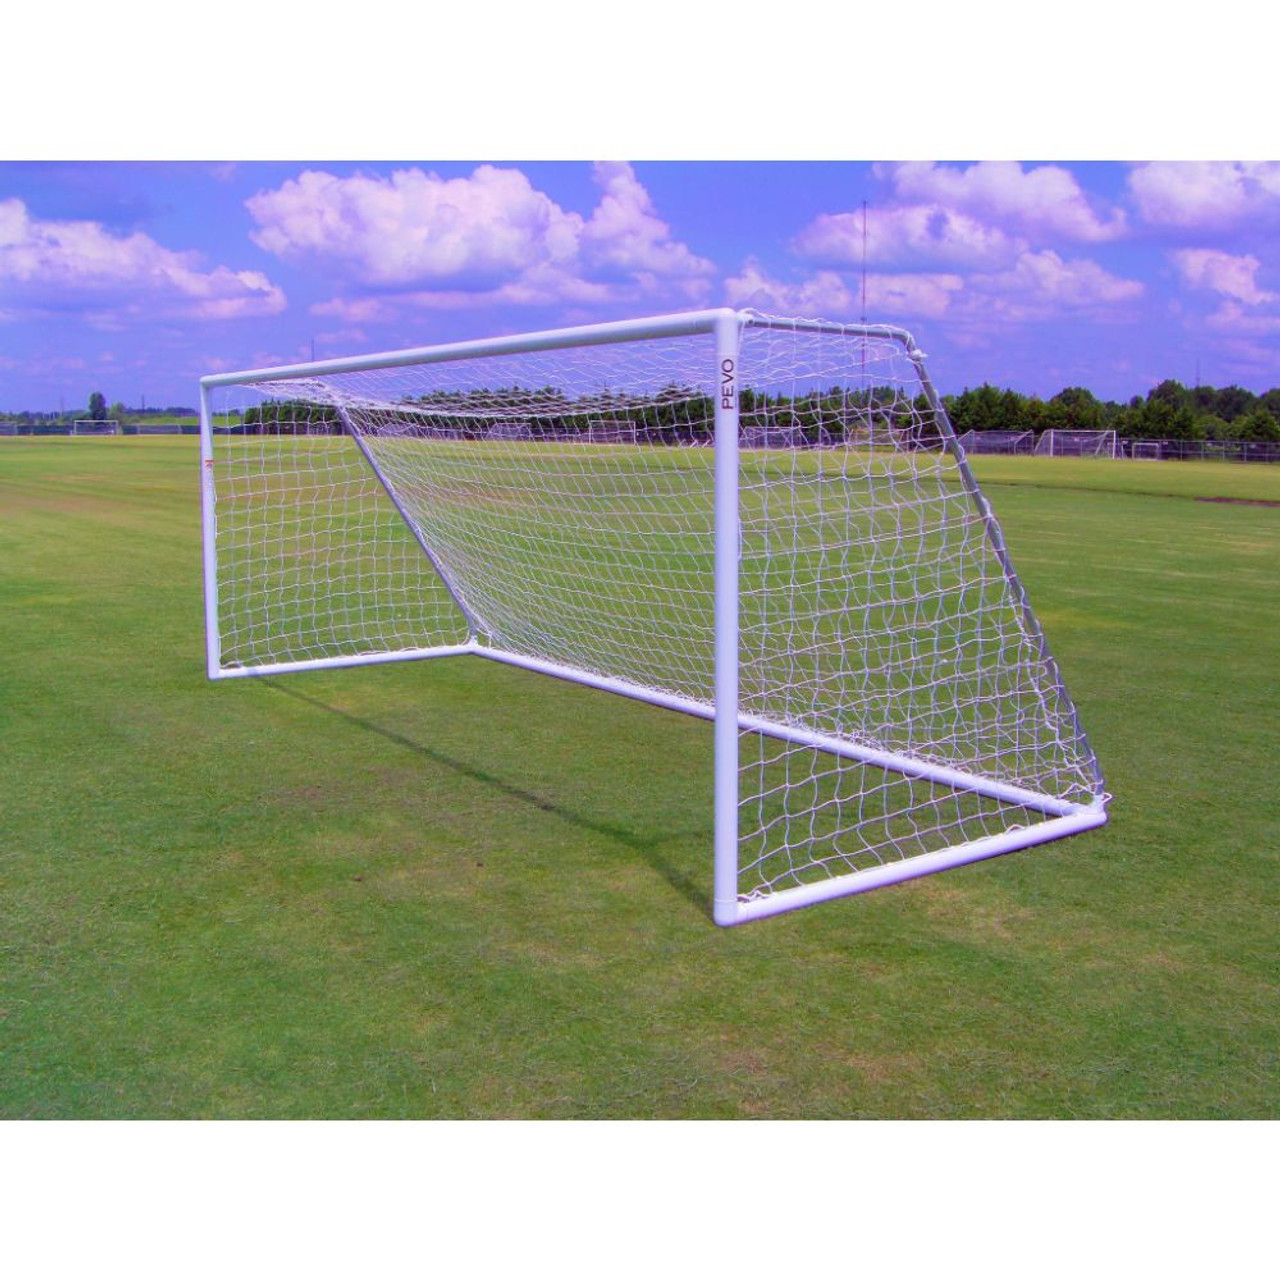 Park Series Youth Soccer Goal - 6.5' x 18.5'